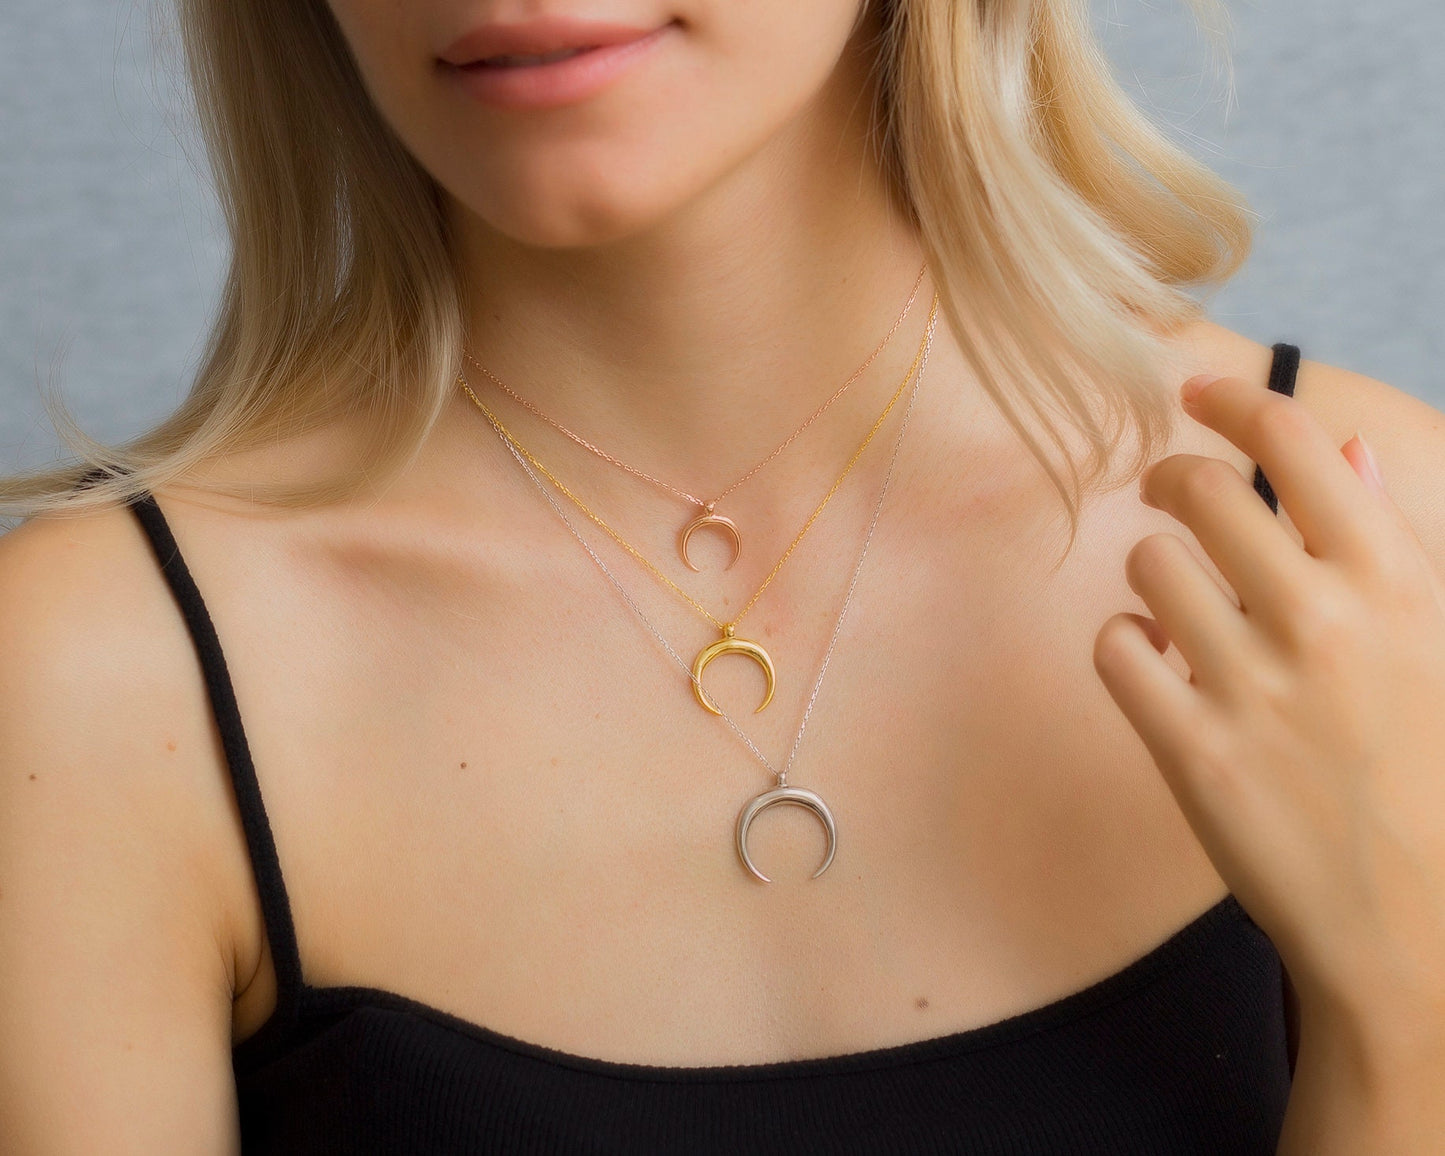 Crescent Moon Necklace, Tusk Necklace, Upside Down Moon Necklace, Christmas Gift, Half Moon Necklace, Mother's Day Gift, Crescent Moon